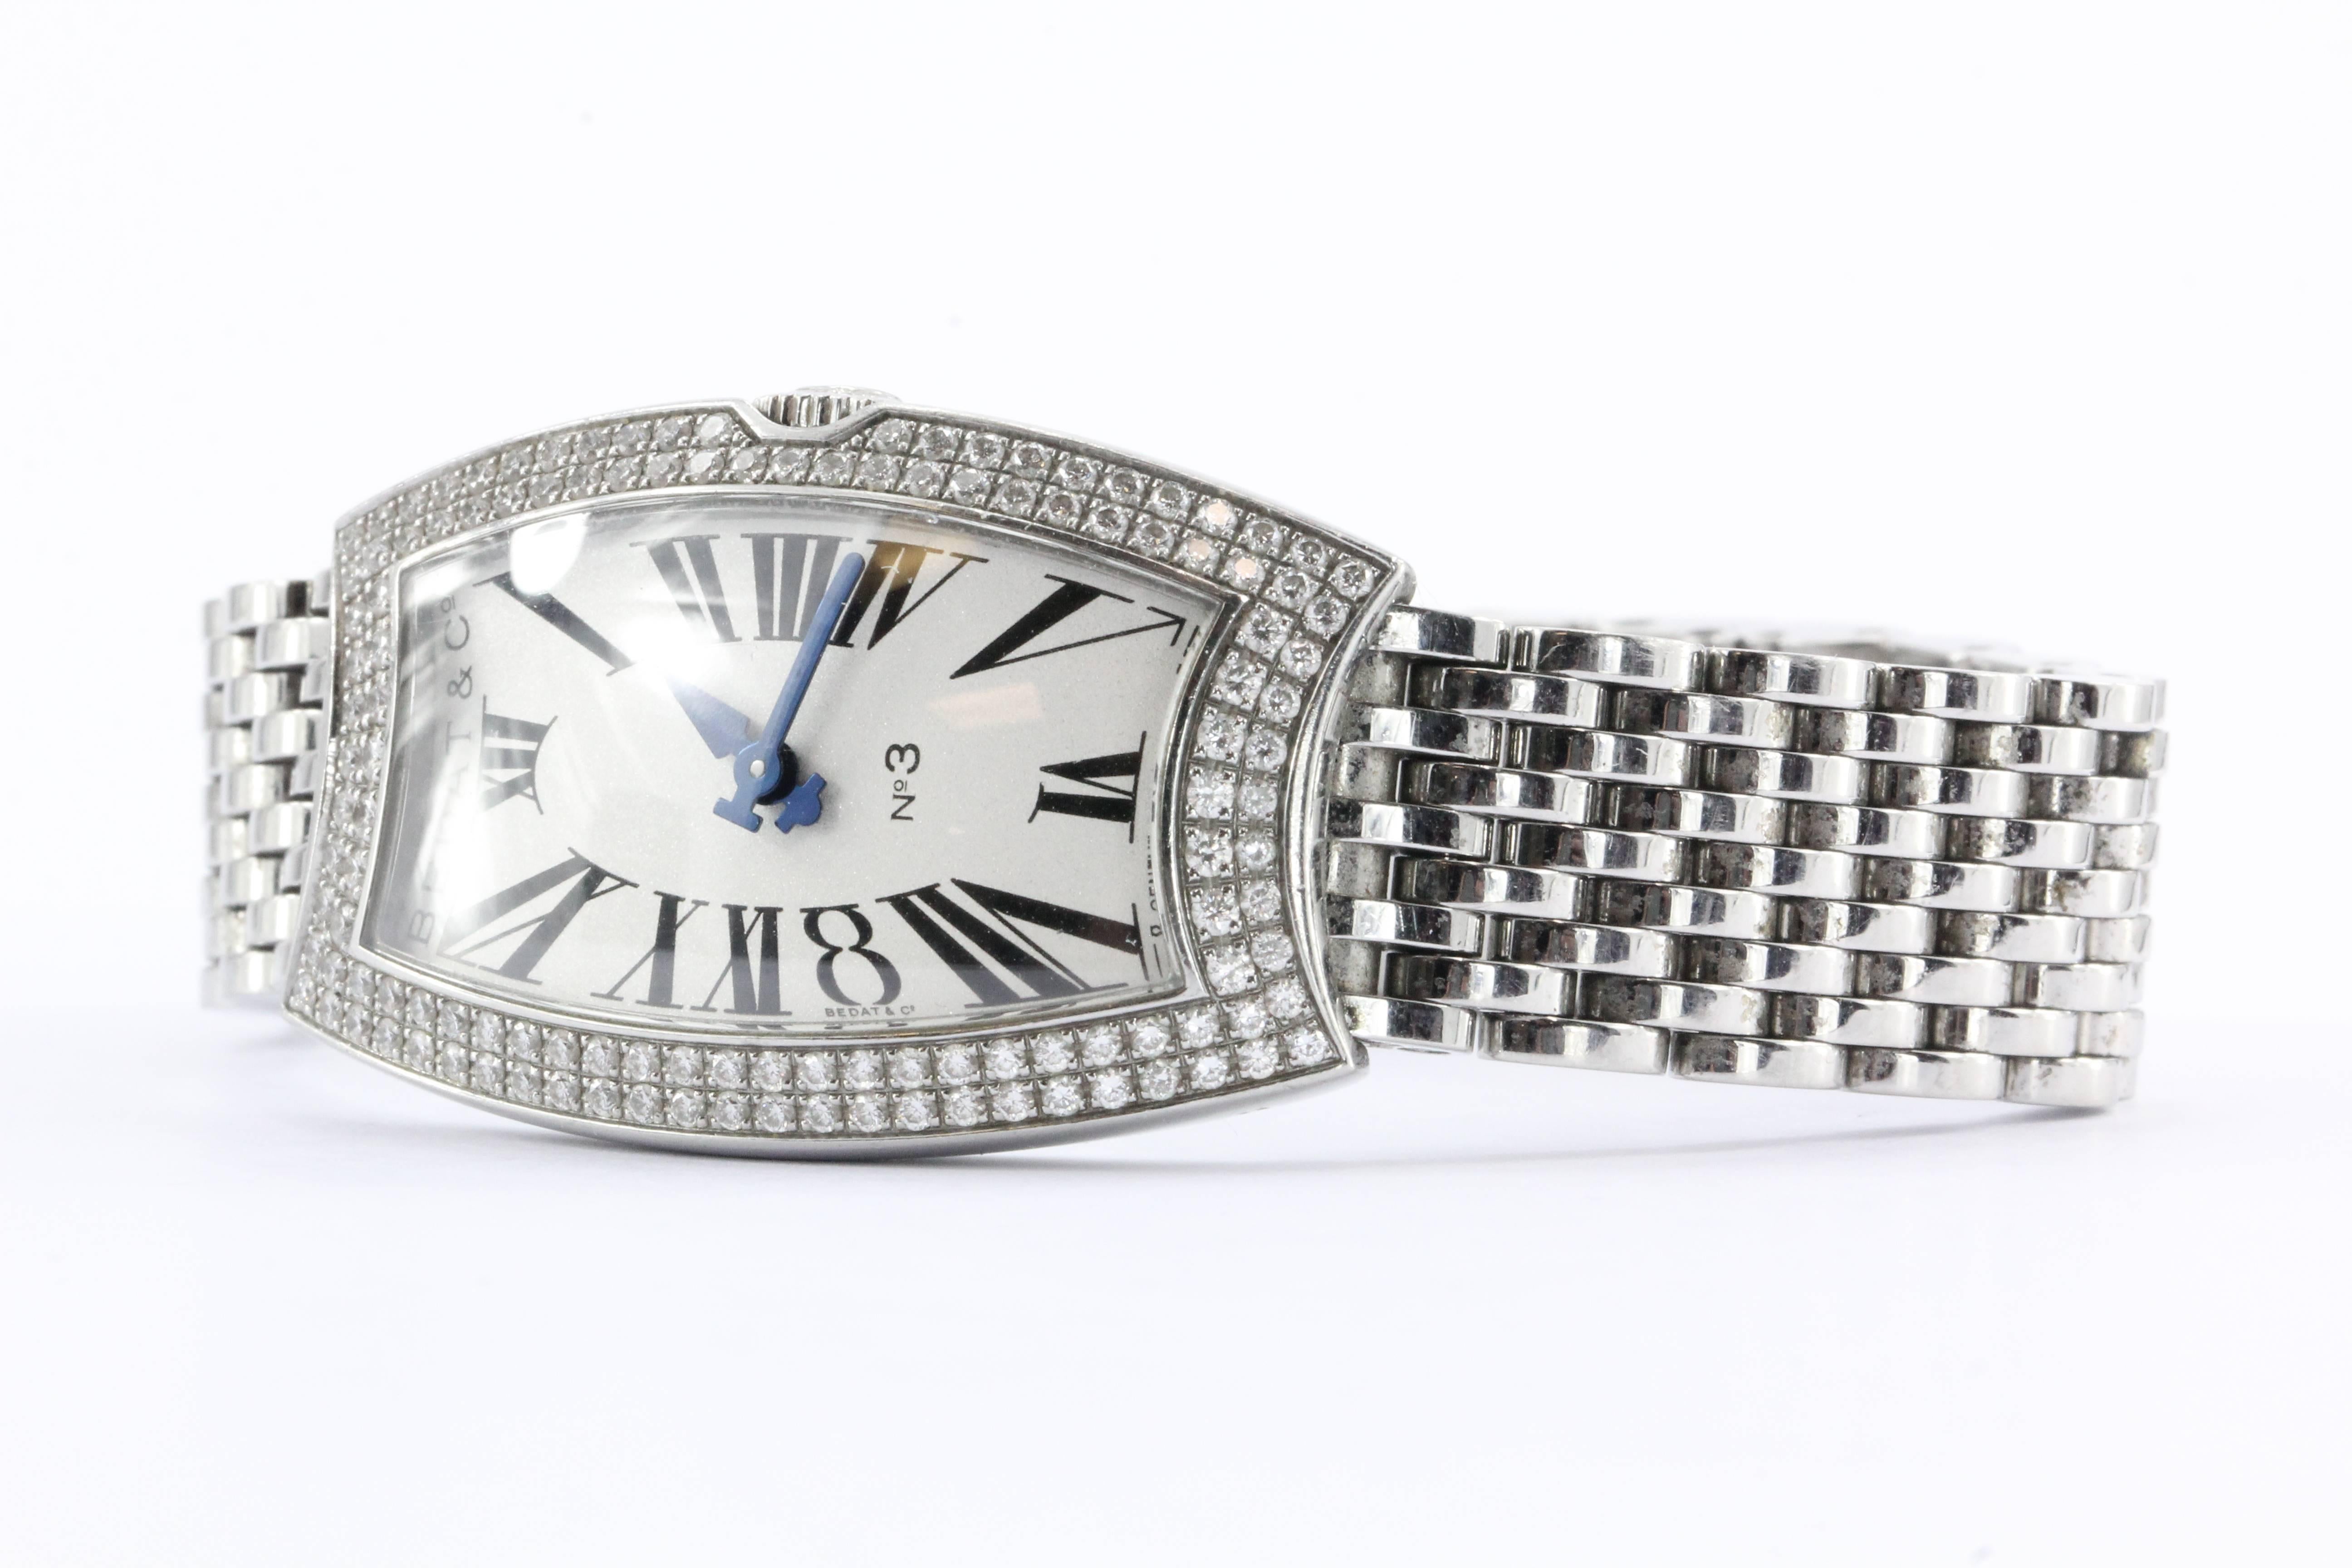 Bedat No 3 Diamond Bezel Stainless Steel Watch. The watch is in great used running estate condition. There are only minimal signs of wear and use. 

Description:
-- Elongated tonneau-shaped case, waisted at 6 o'clock and 12 o'clock
--